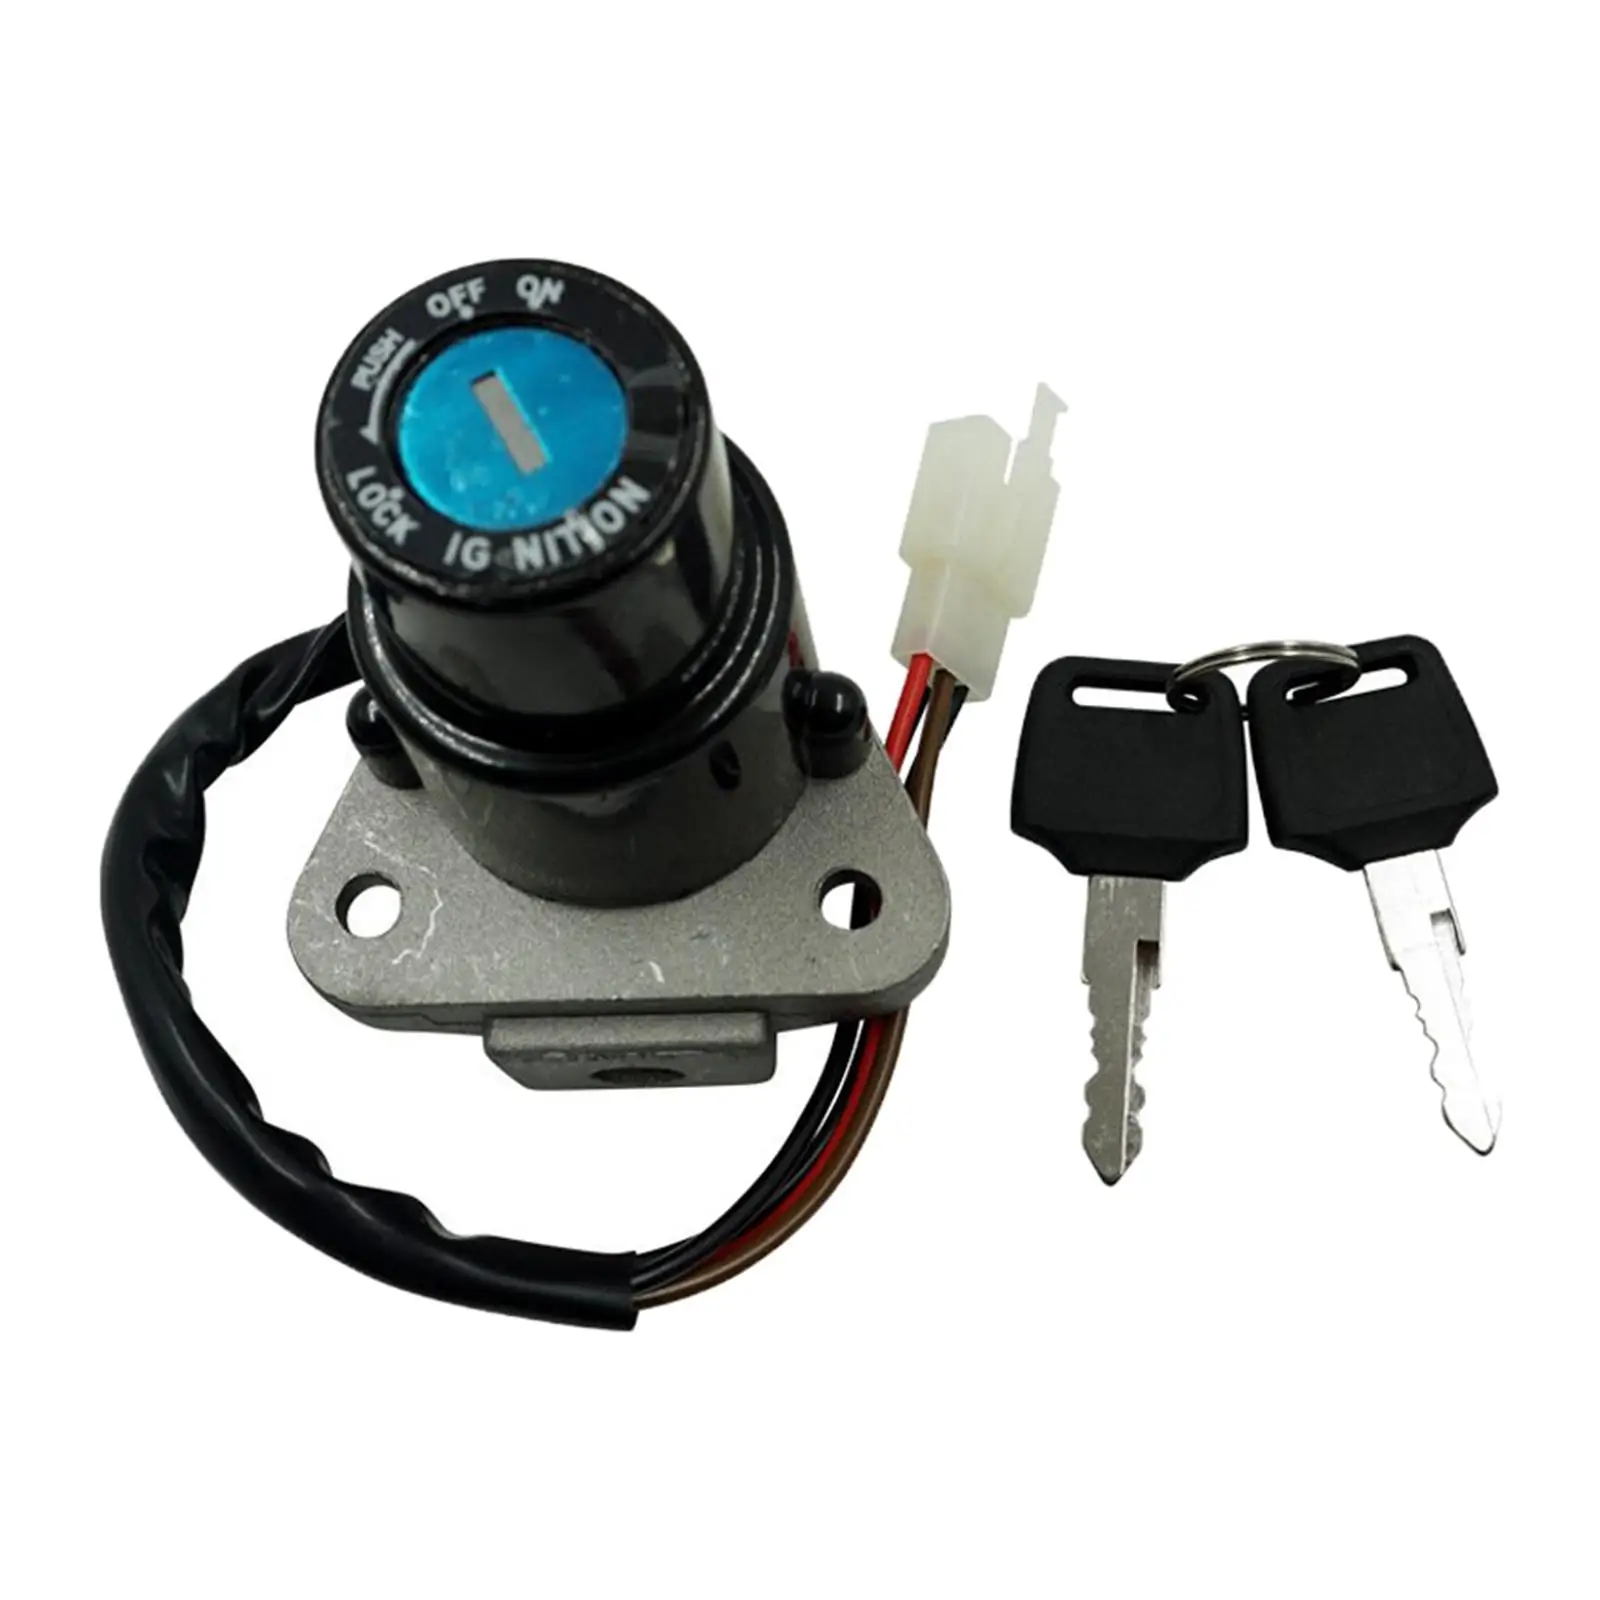 Motorcycle Ignition Switch Key Accessory Fit for DT125 XT225 TW200